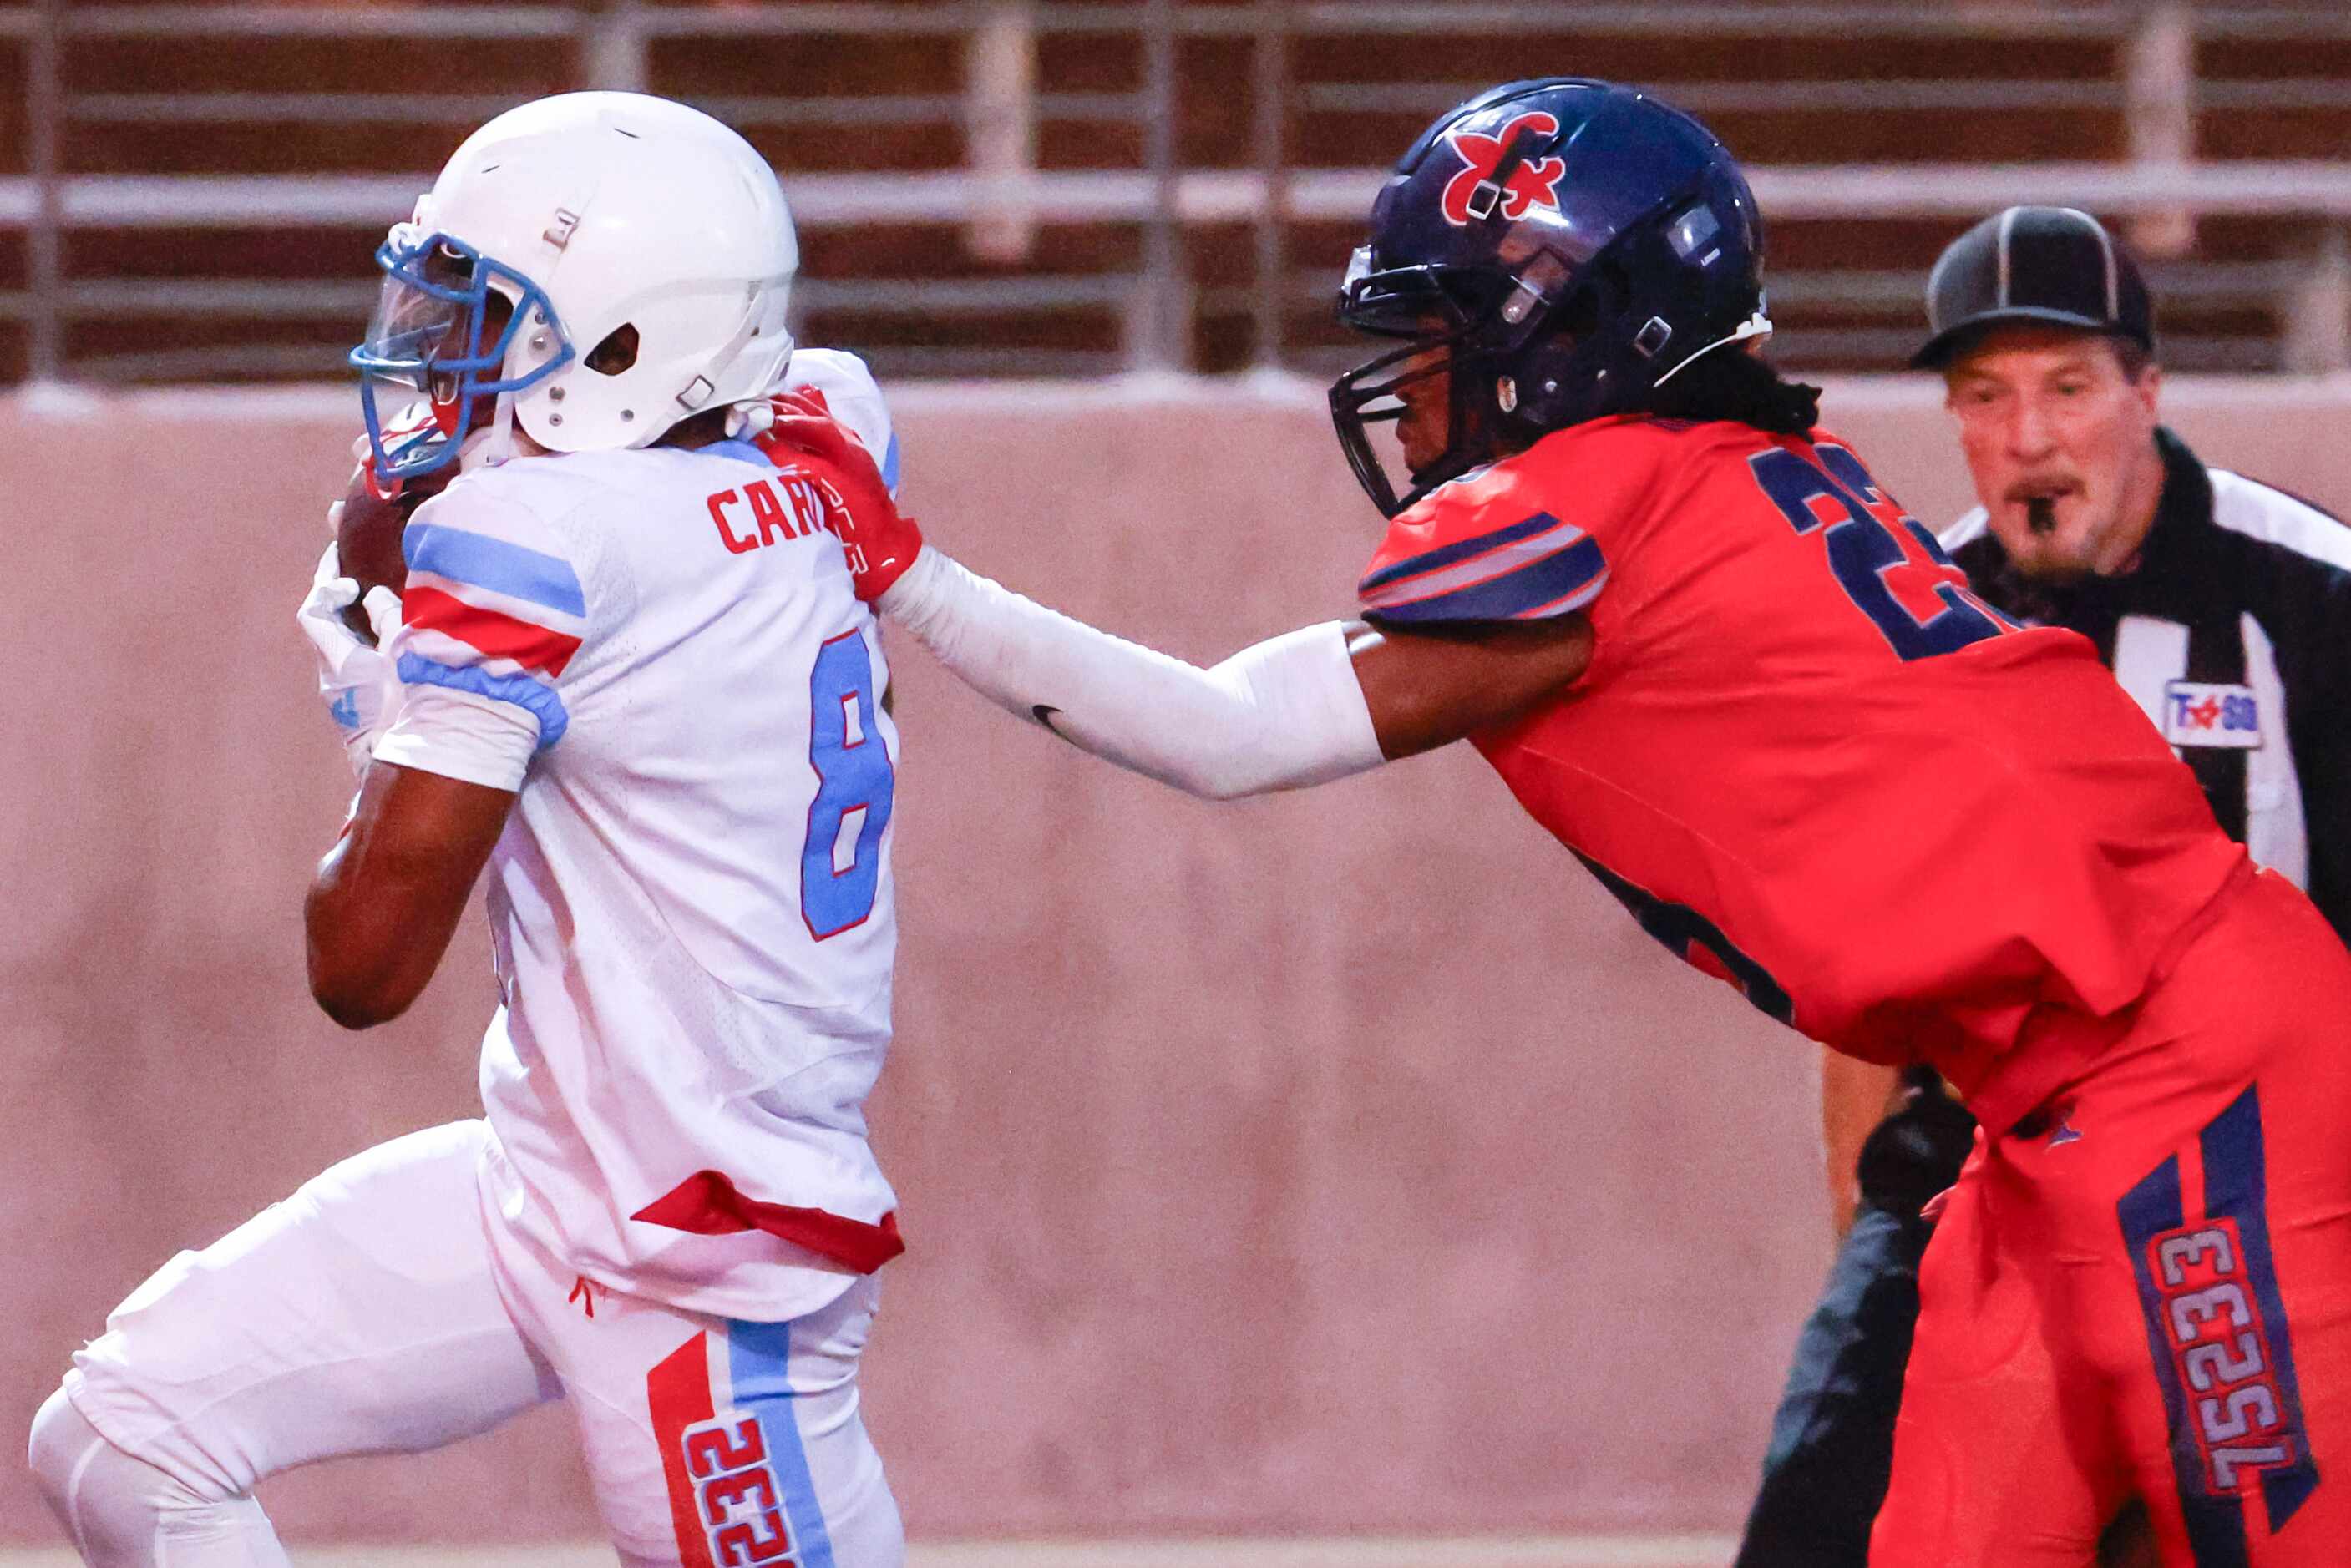 Carter High’s O’ryan Wallace (left) makes a touchdown as Kimball High’s BJ Shelby reaches to...